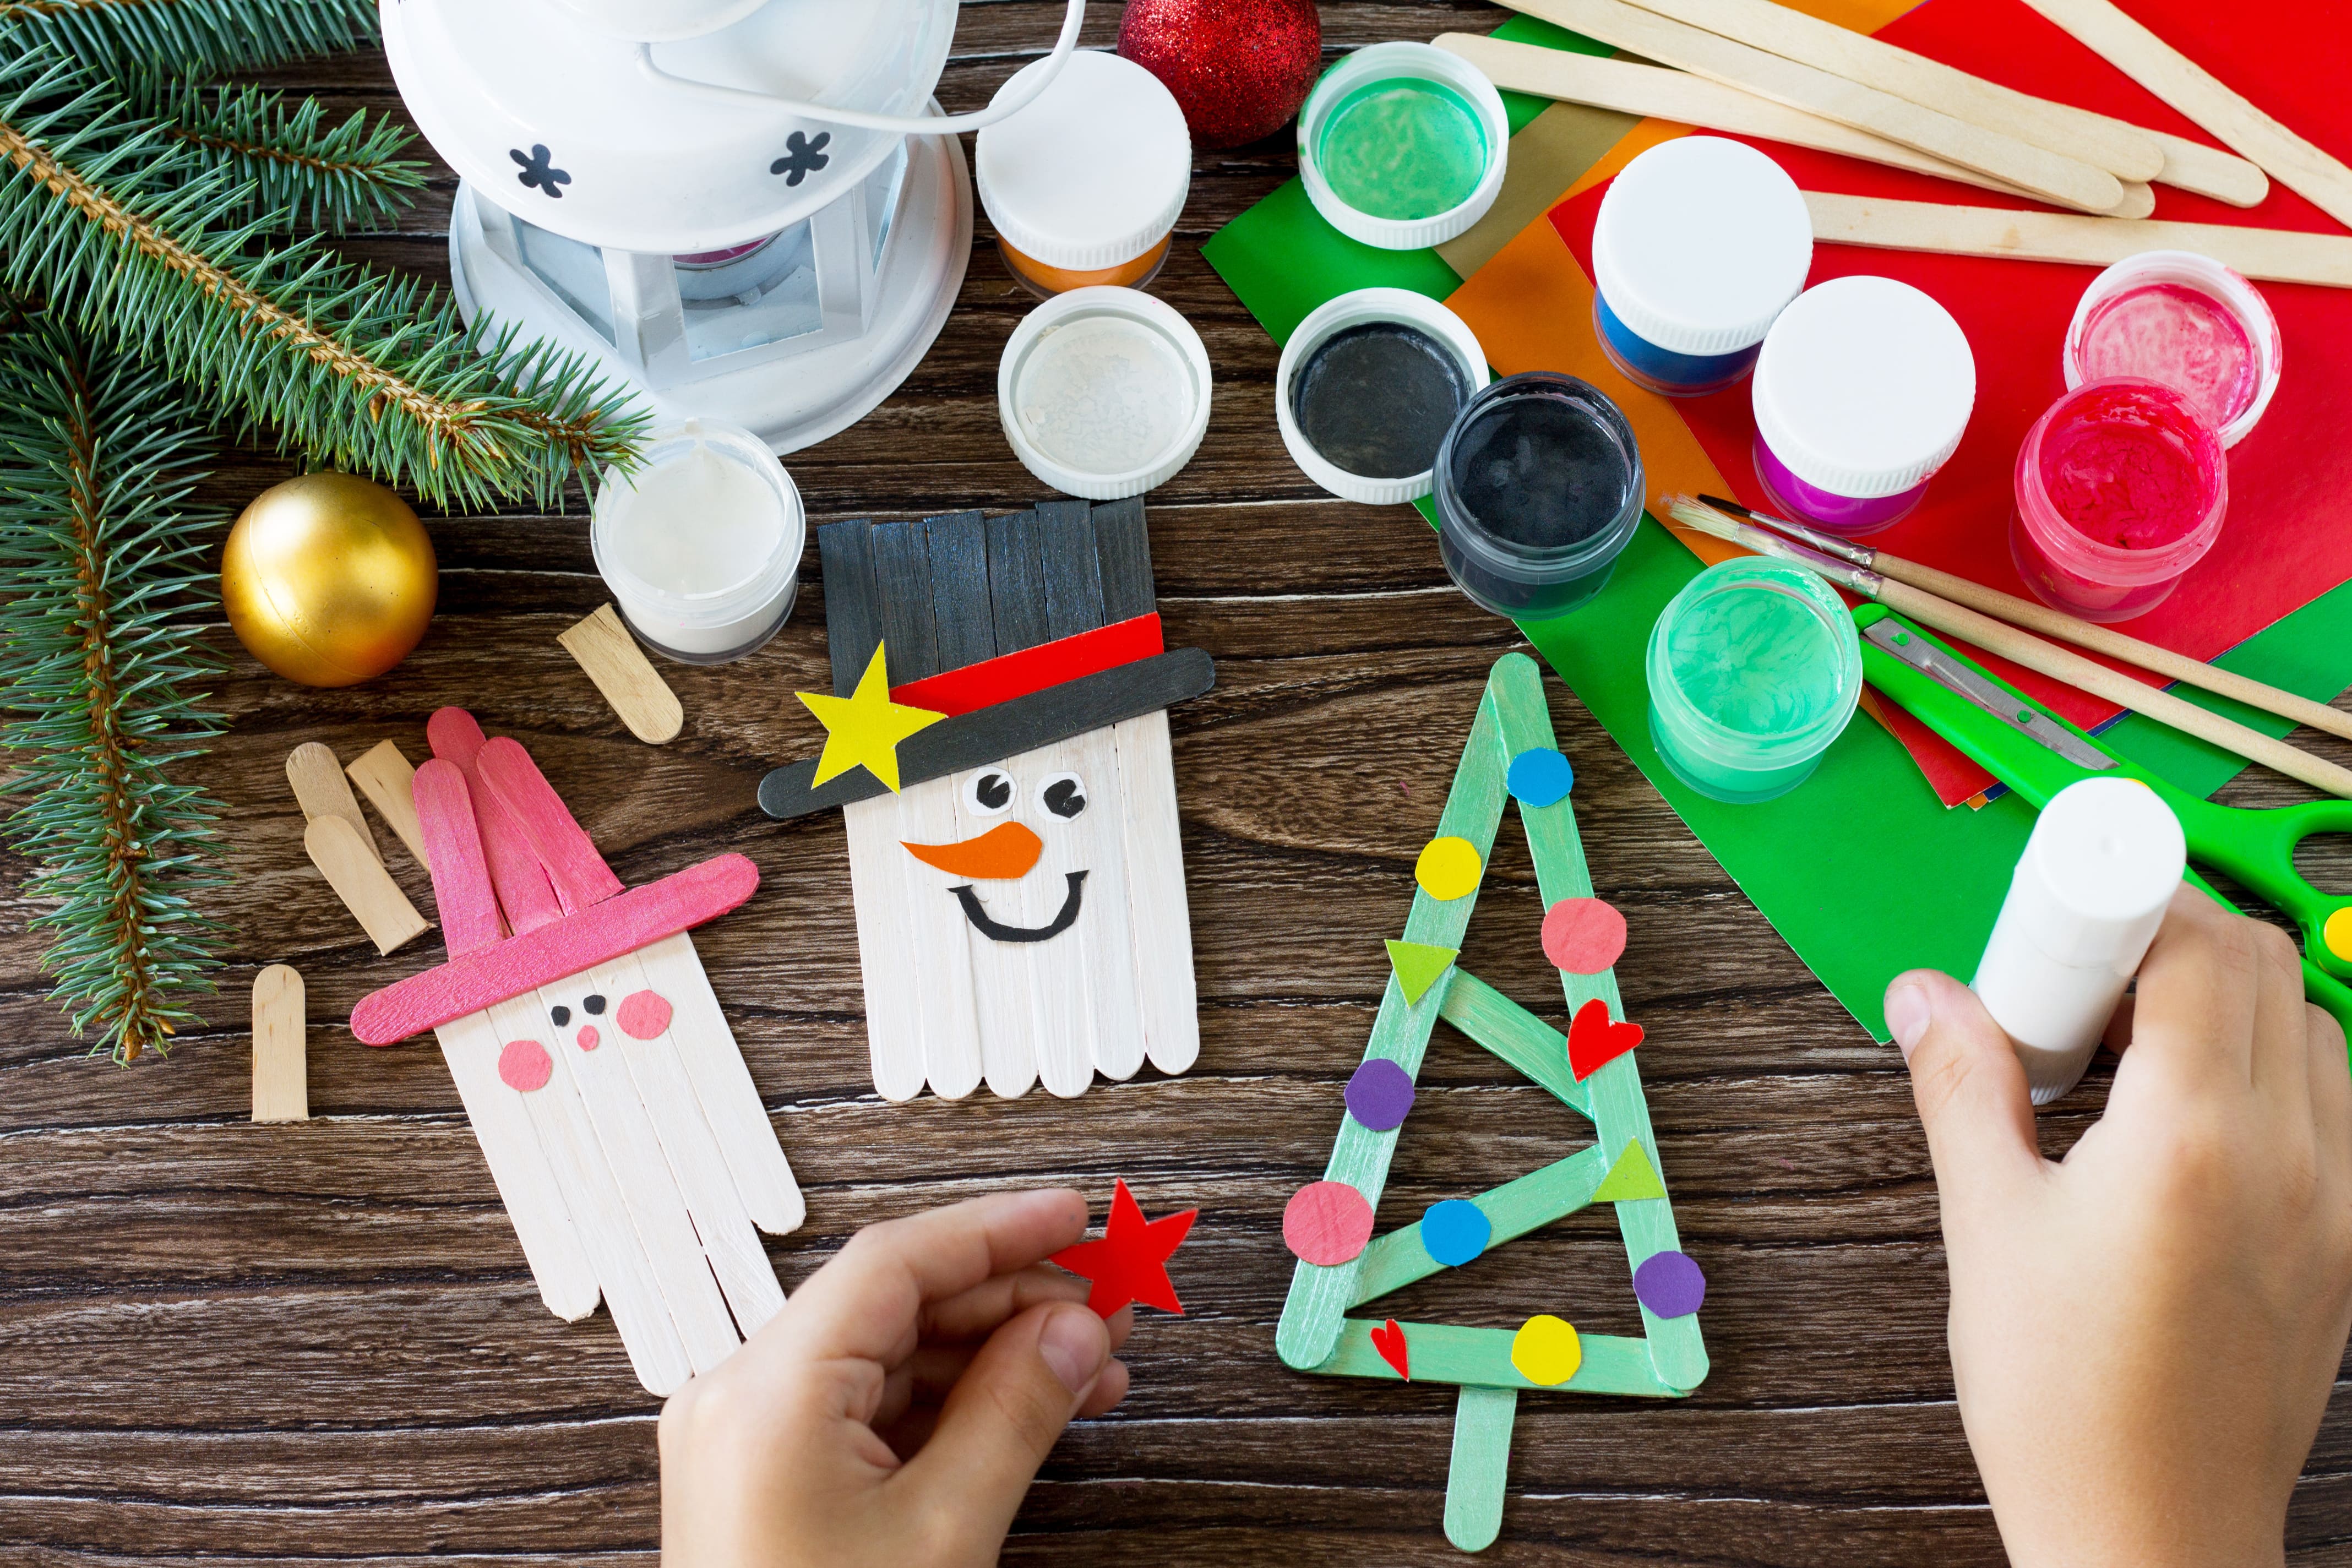 Festive Christmas crafting in session. Open pots of paint, glue, and wooden lolly sticks lie against a backdrop of a wooden table top and some coloured card.